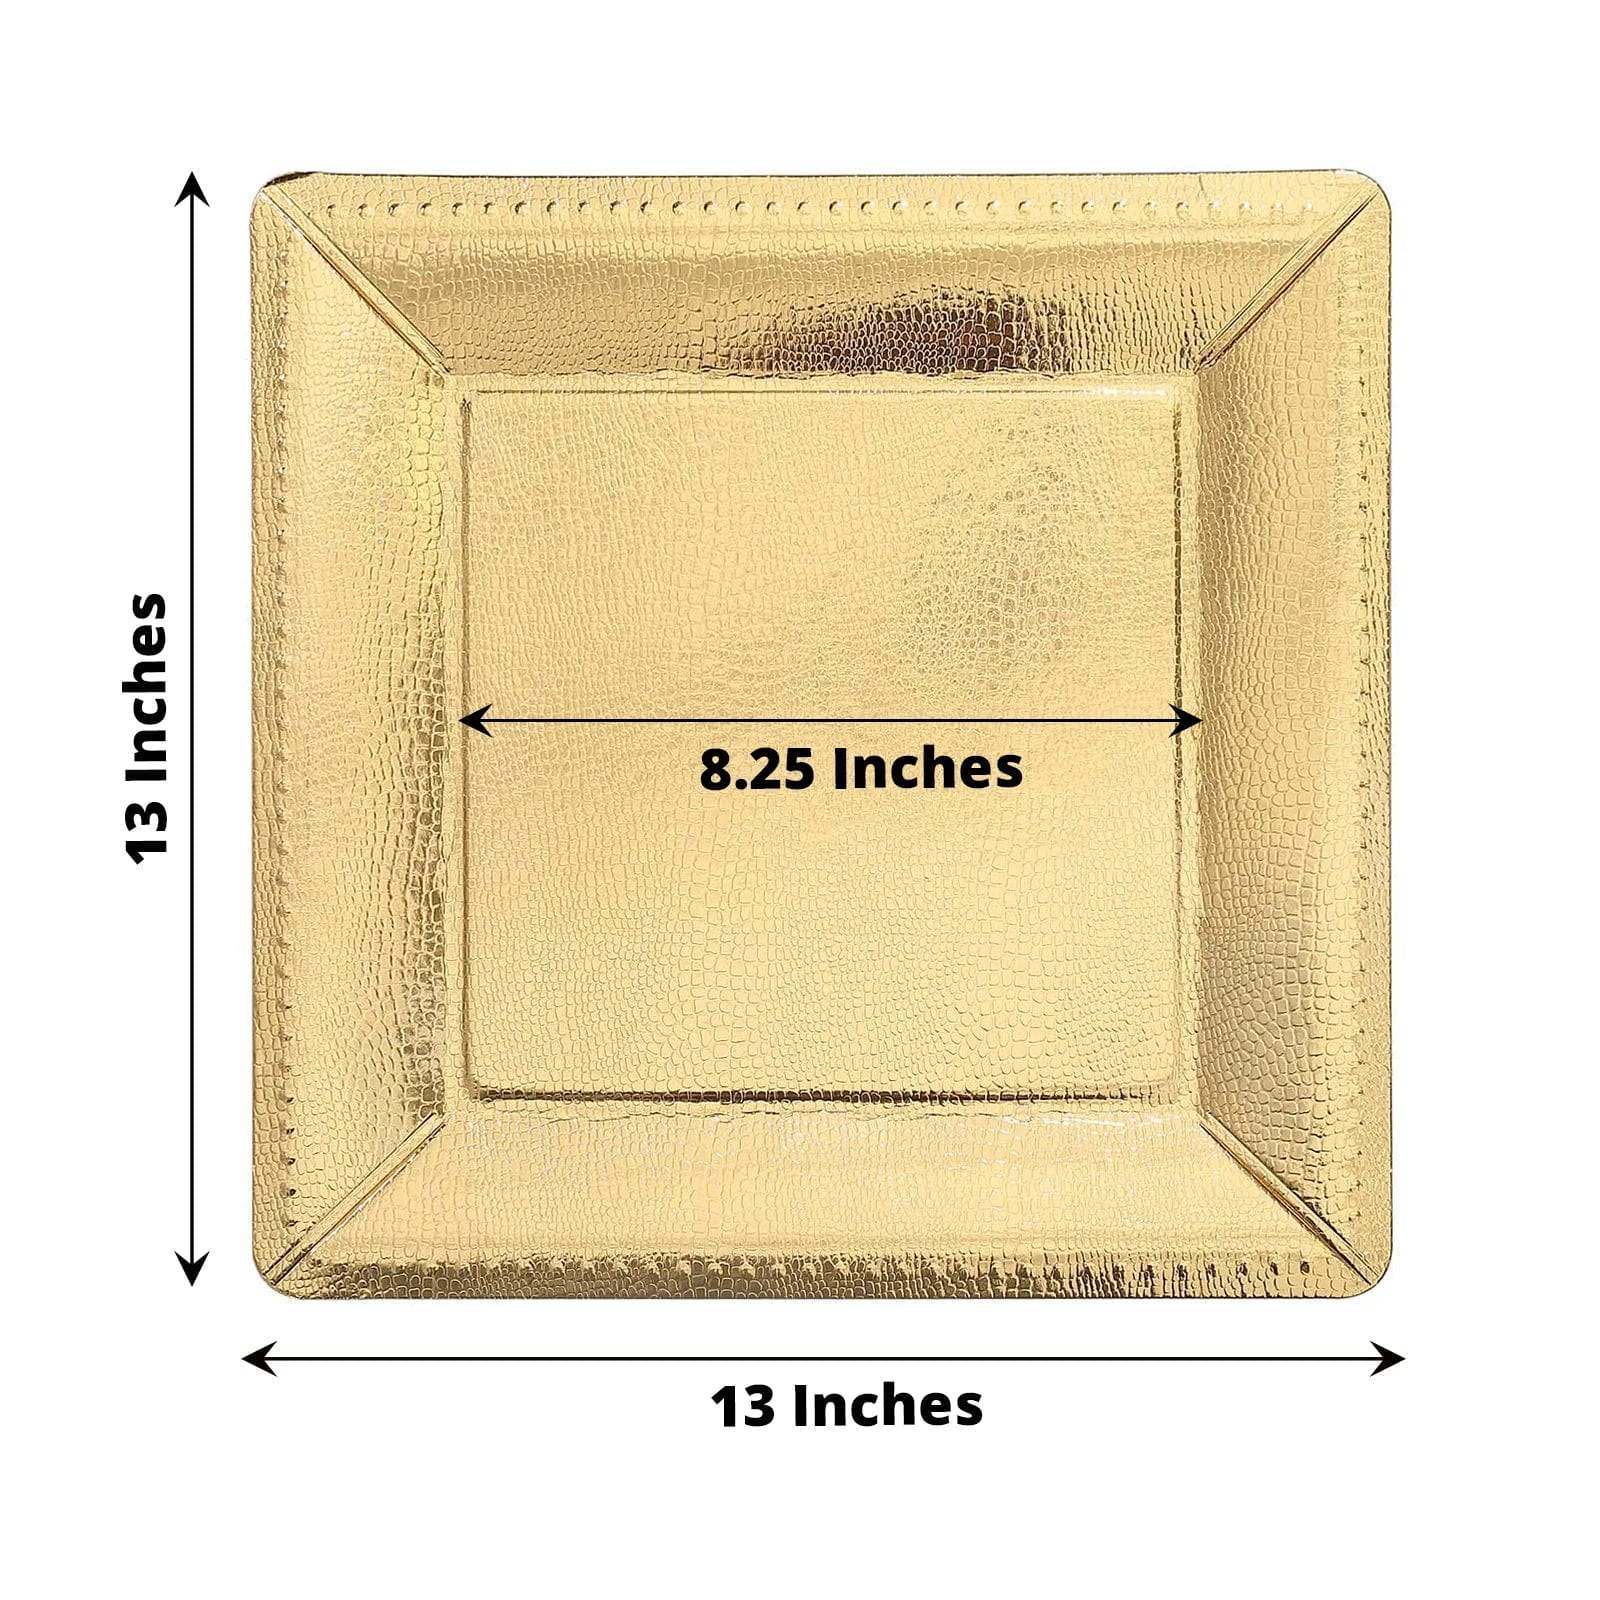 10 Square 13 in Disposable Cardboard Paper Charger Plates Leather Like Design